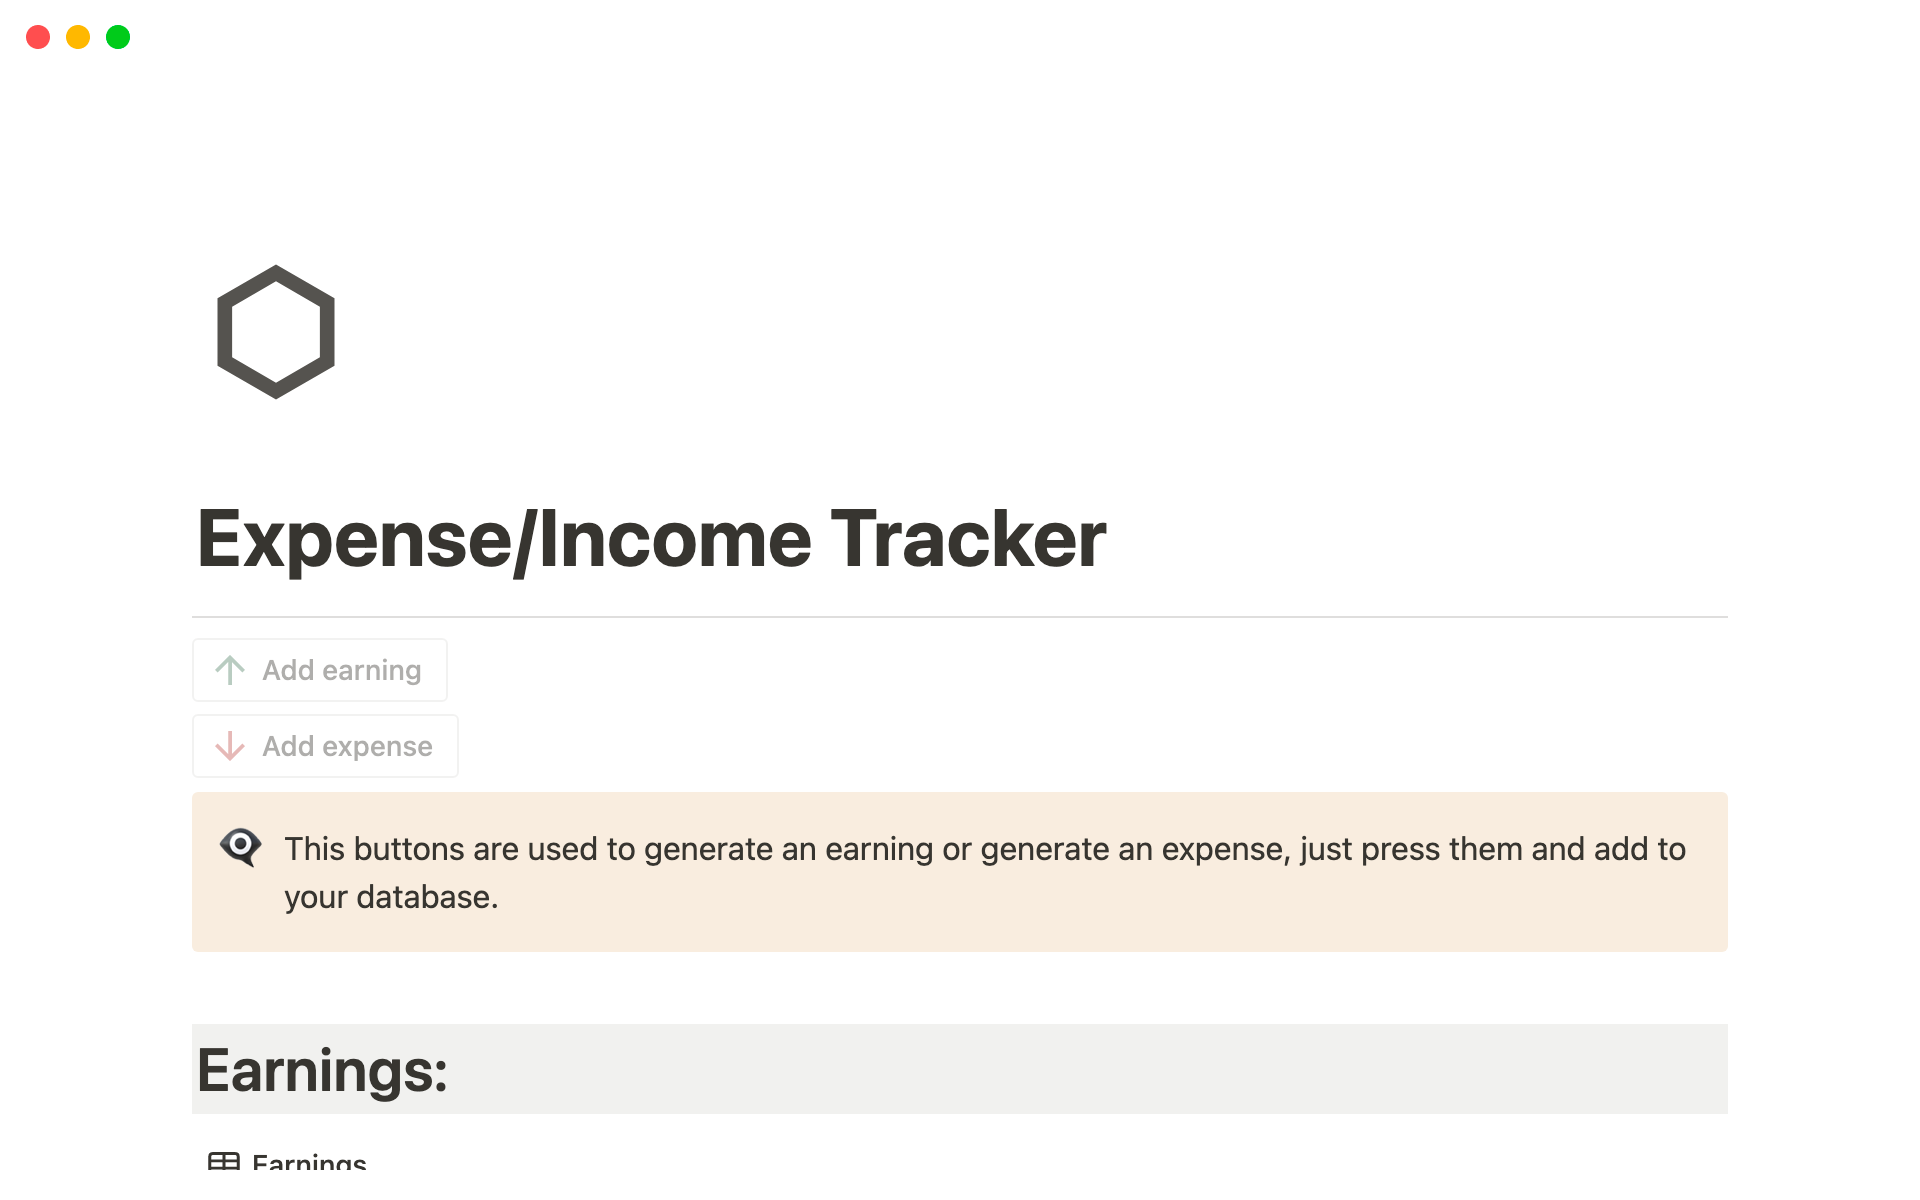 Track your expenses/income